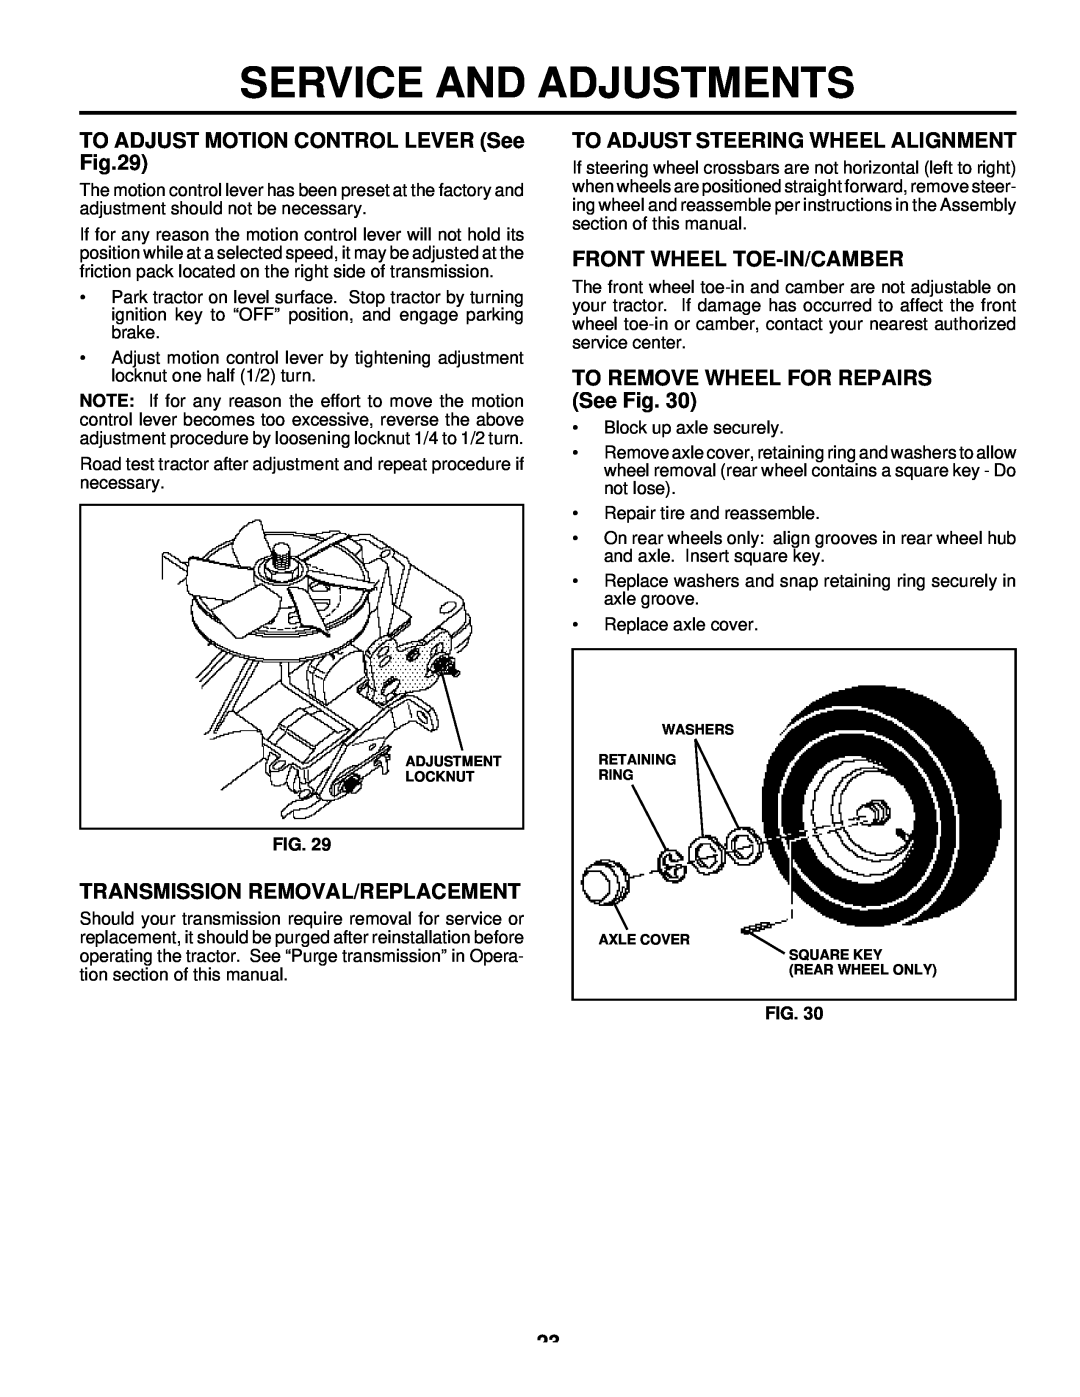 Husqvarna LTH125 TO ADJUST MOTION CONTROL LEVER See, Transmission Removal/Replacement, To Adjust Steering Wheel Alignment 